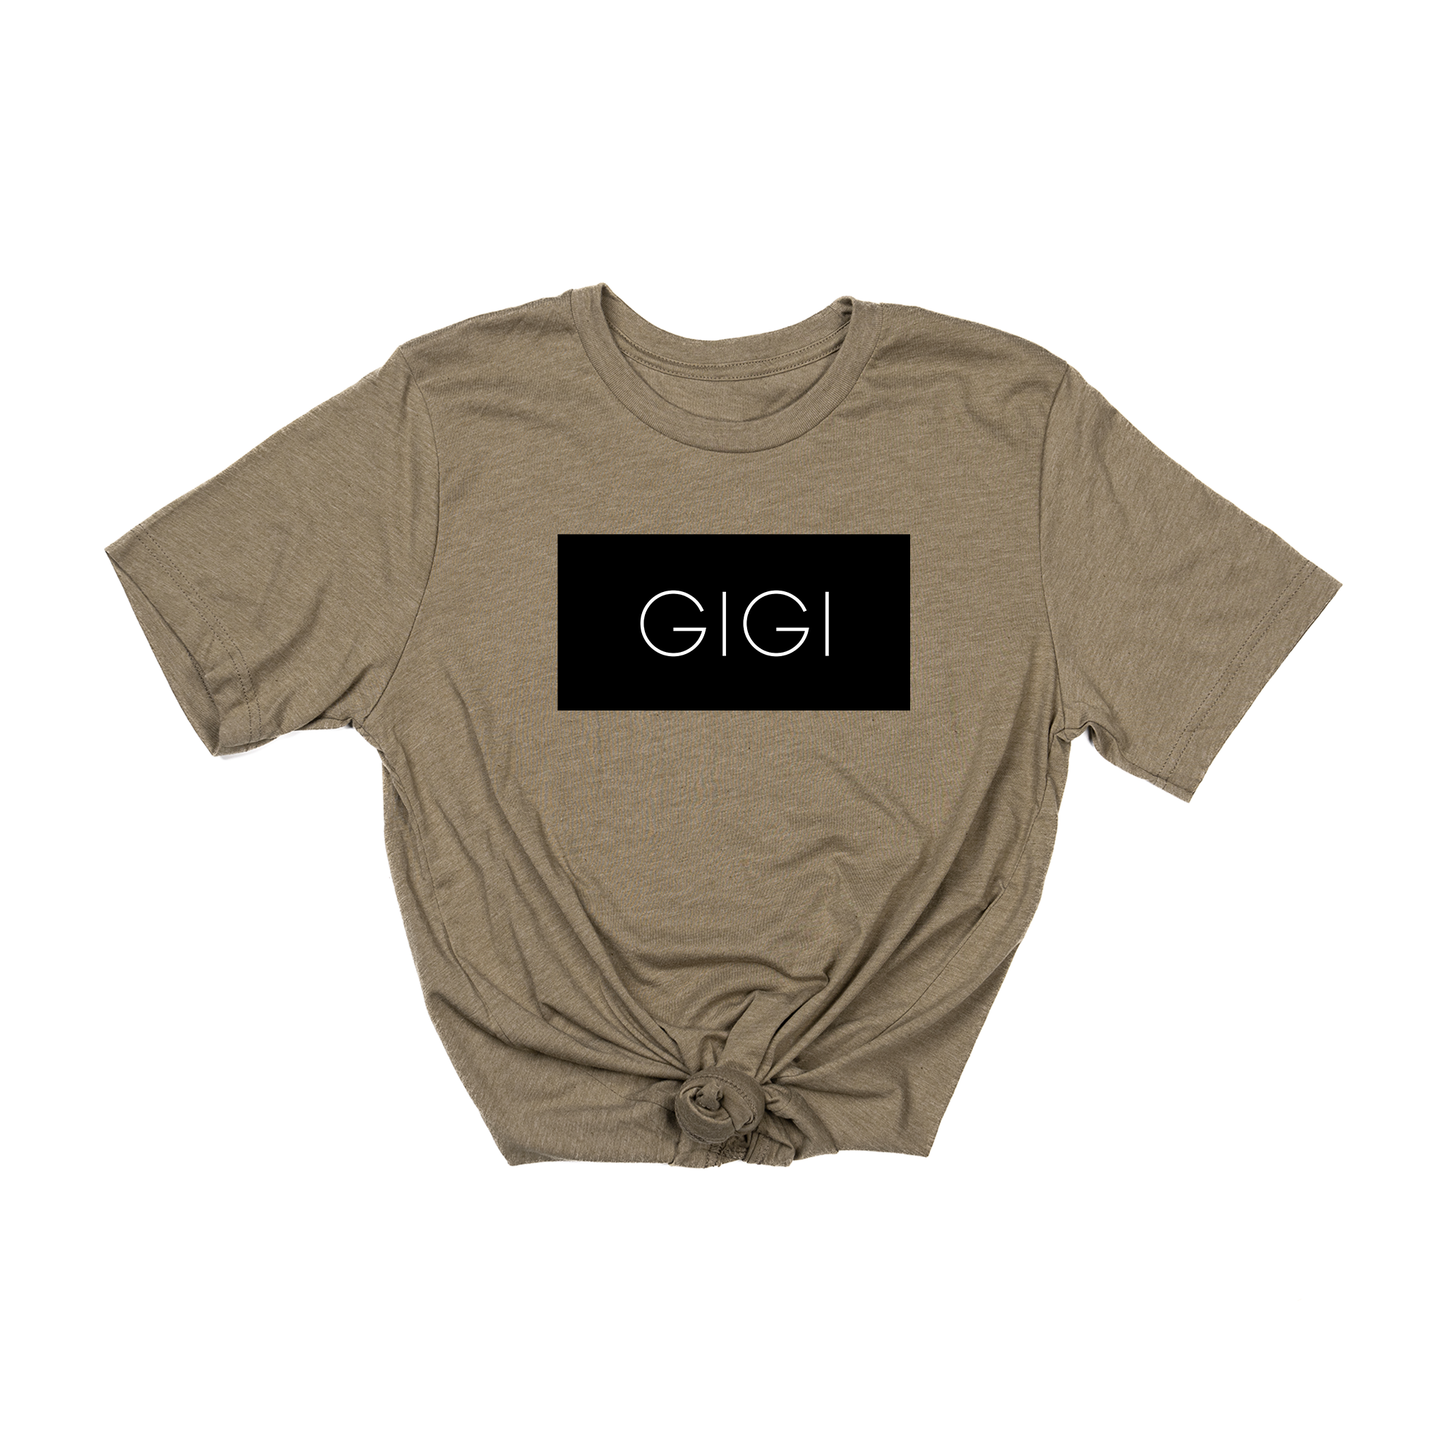 Gigi (Boxed Collection, Black Box/White Text, Across Front) - Tee (Olive)